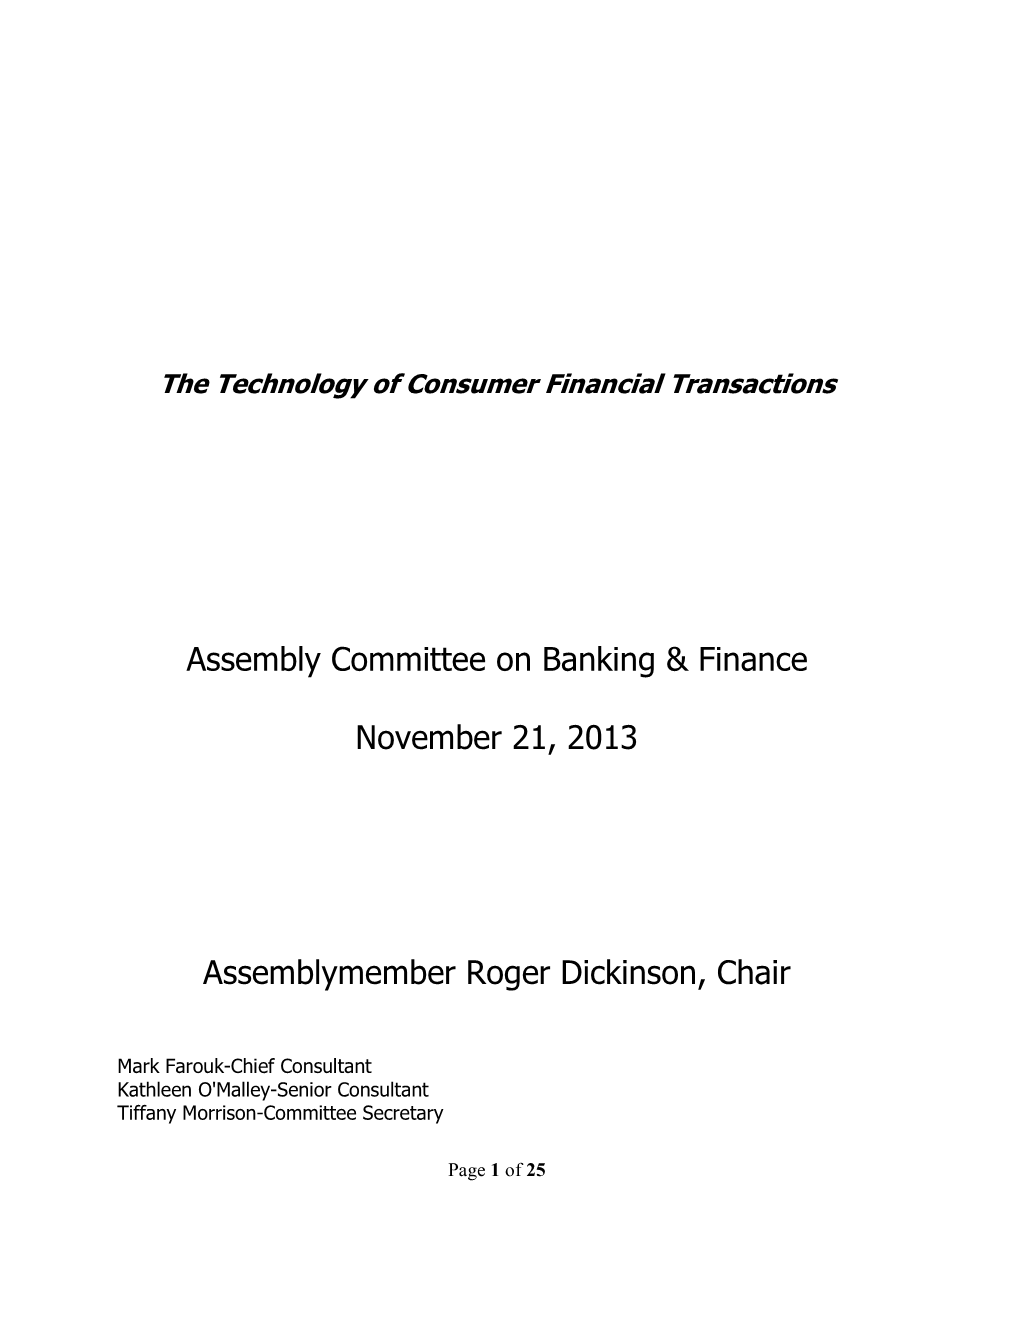 The Technology of Consumer Financial Transactions Background